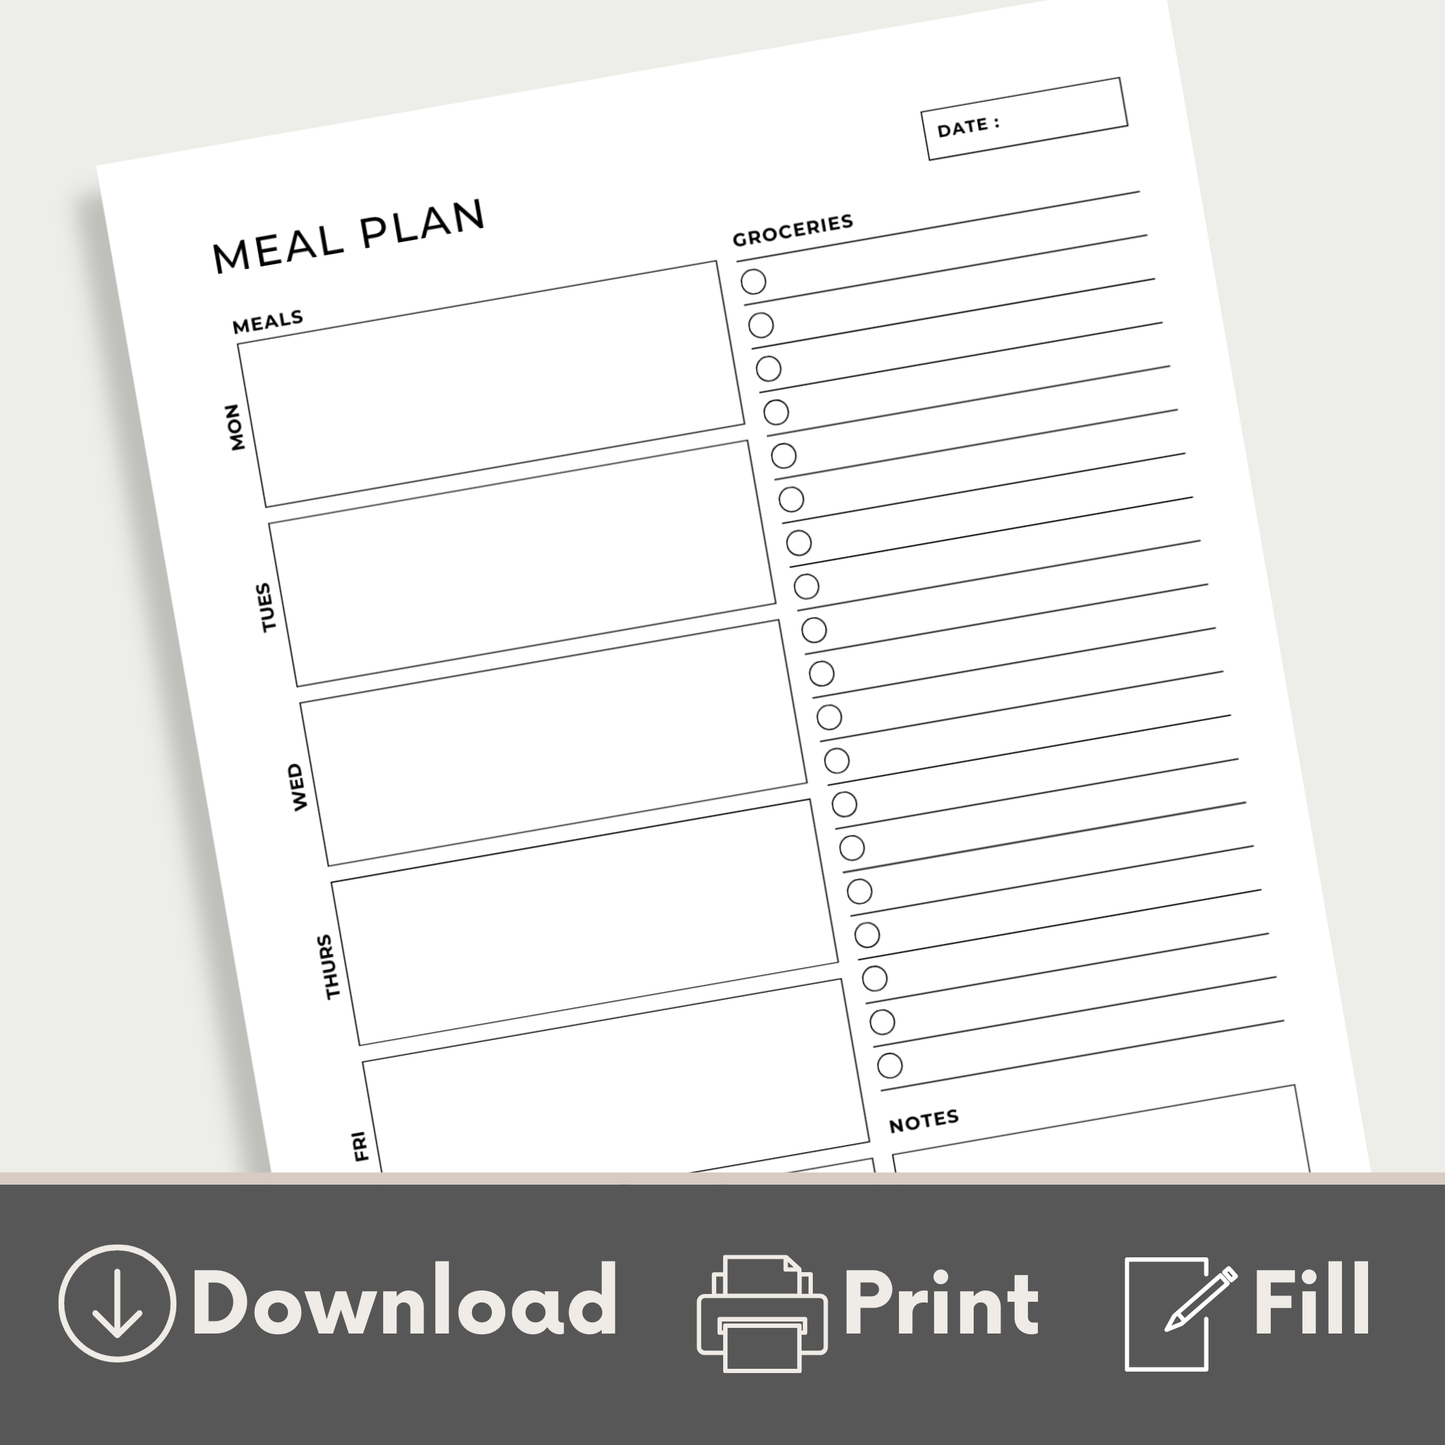 Meal Plan and Grocery List